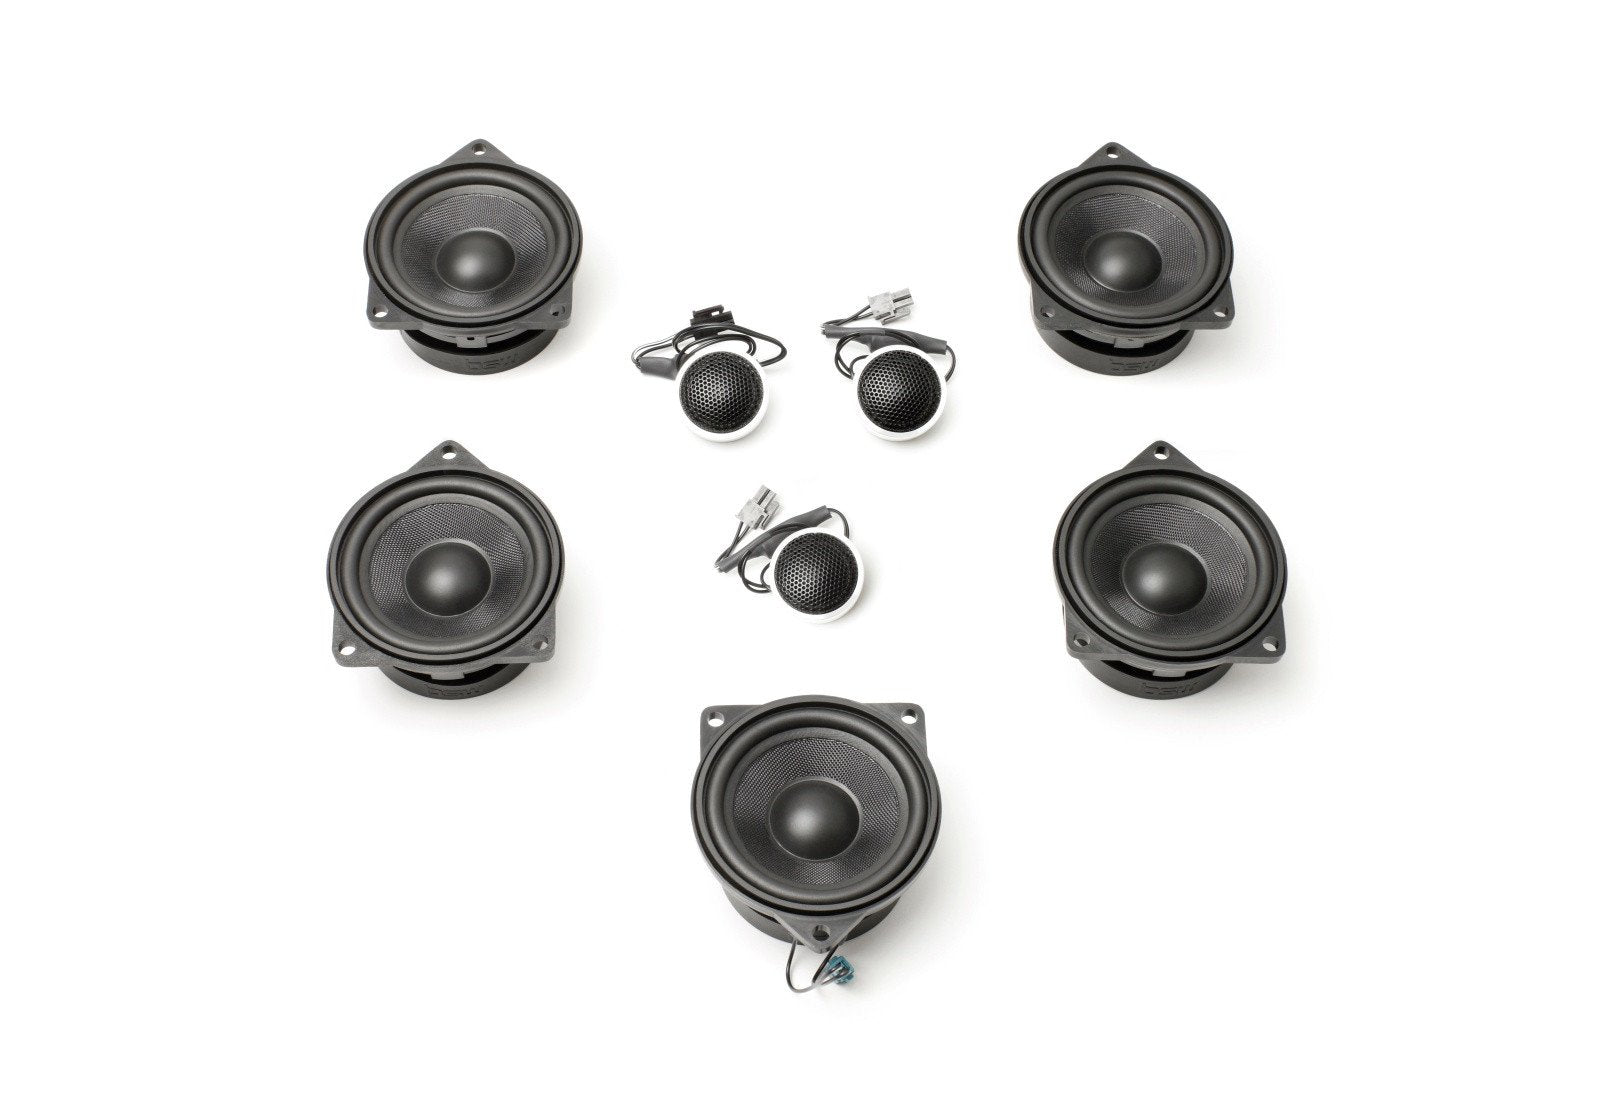 Stage One BMW Speaker Upgrade for G20/G80 3 Series with Standard Hi-Fi